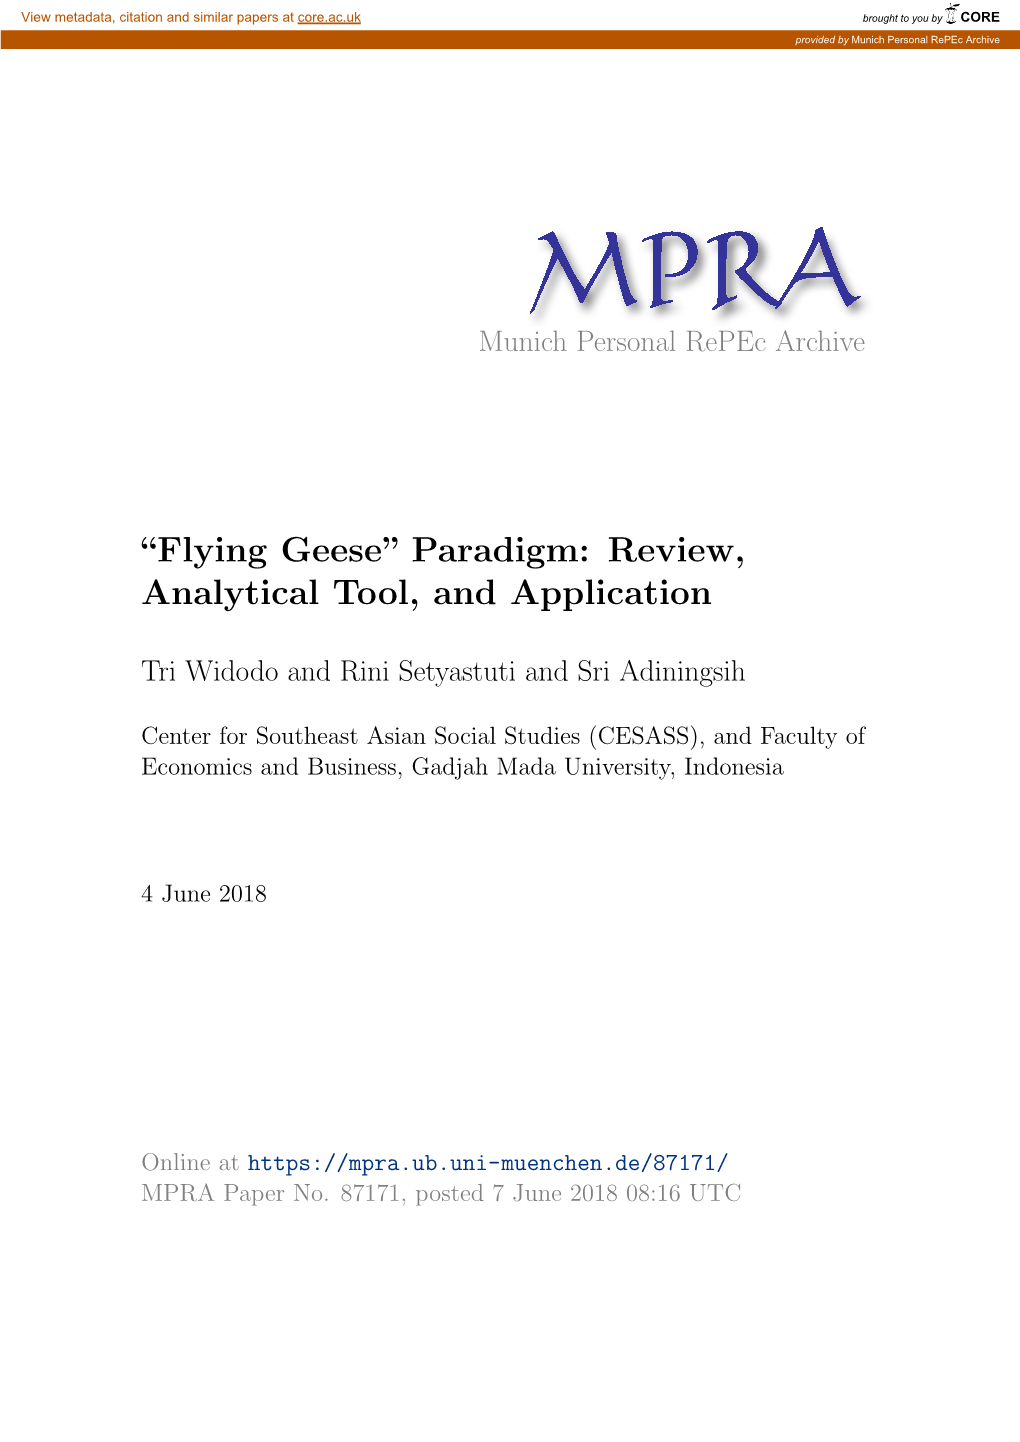 Flying Geese” Paradigm: Review, Analytical Tool, and Application